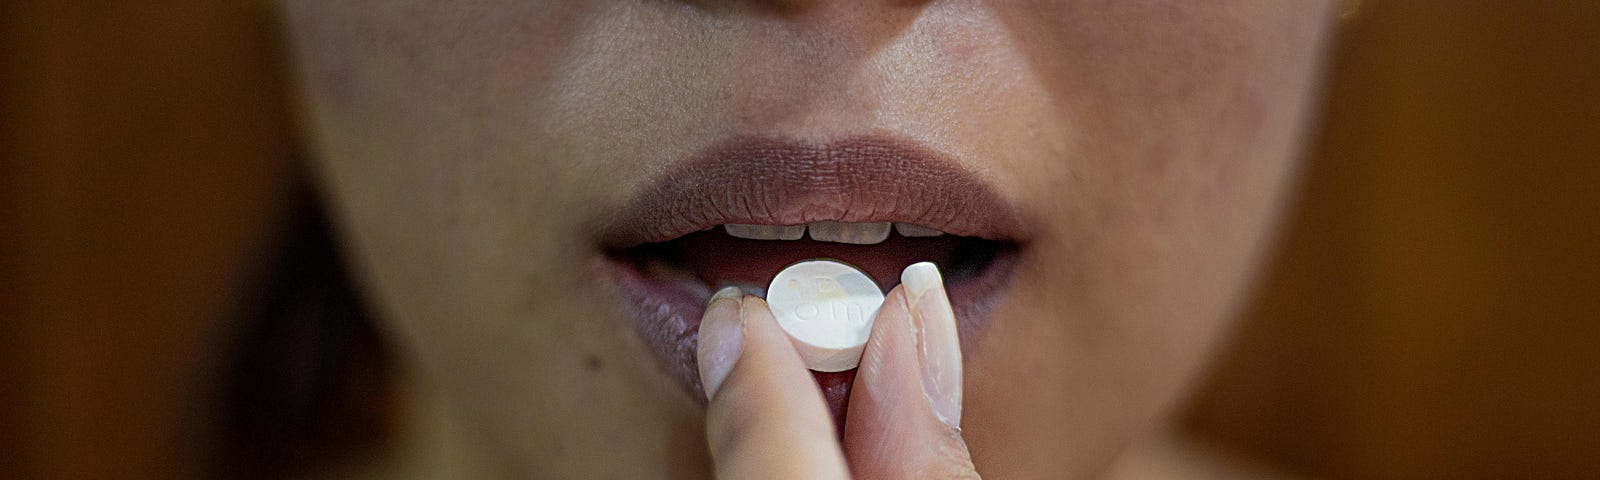 A woman placing a pill in her mouth.